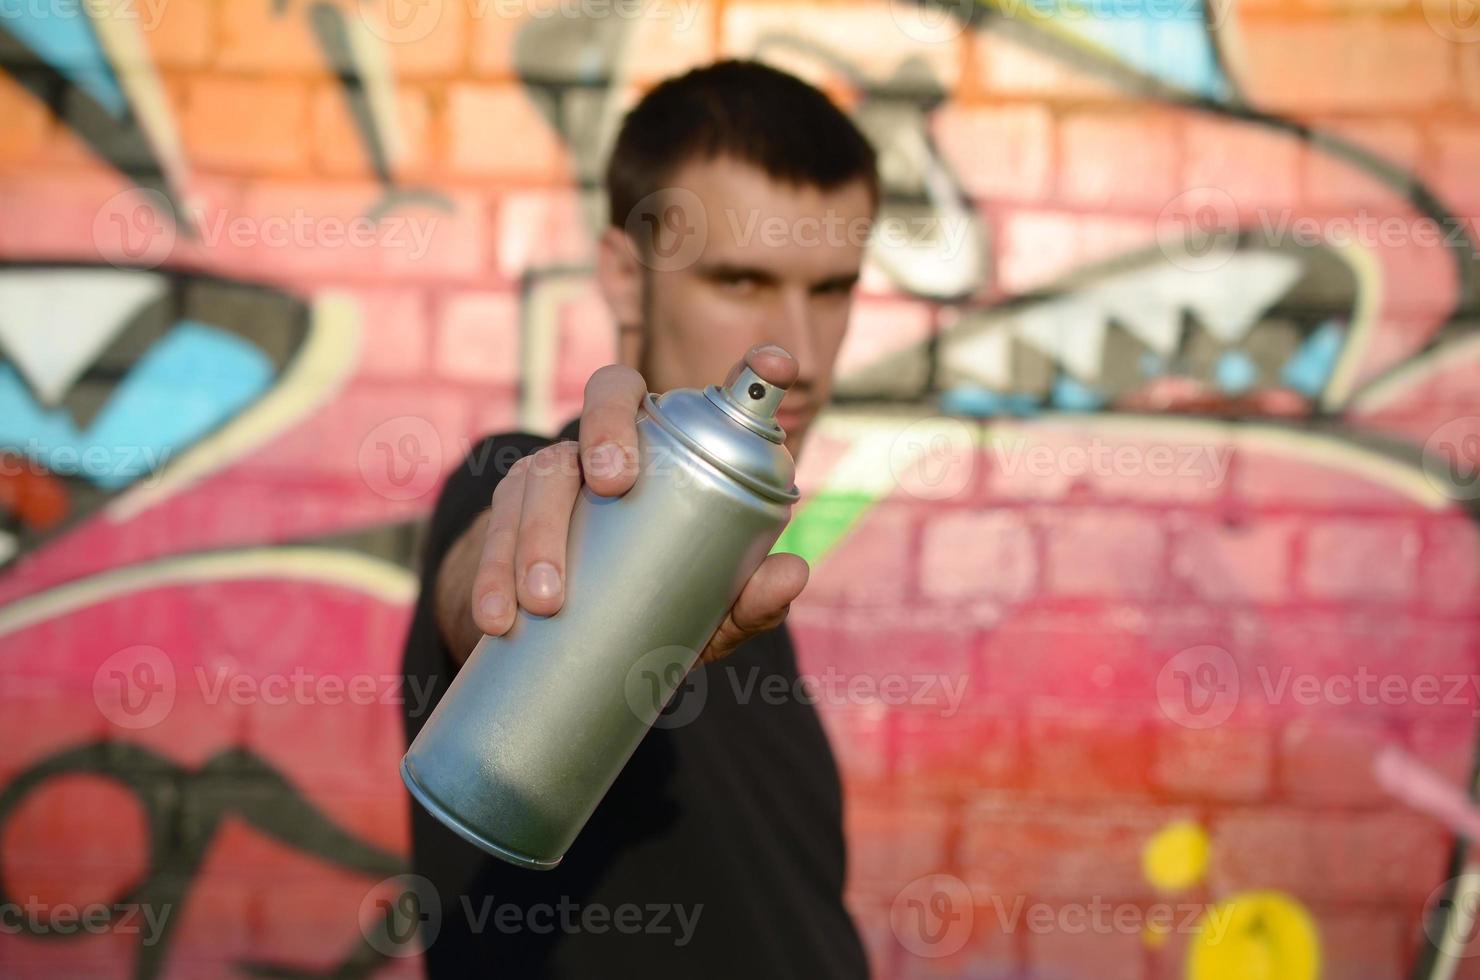 Young graffiti artist aims his spray can on background of colorful graffiti in pink tones on brick wall. Street art and contemporary painting process photo